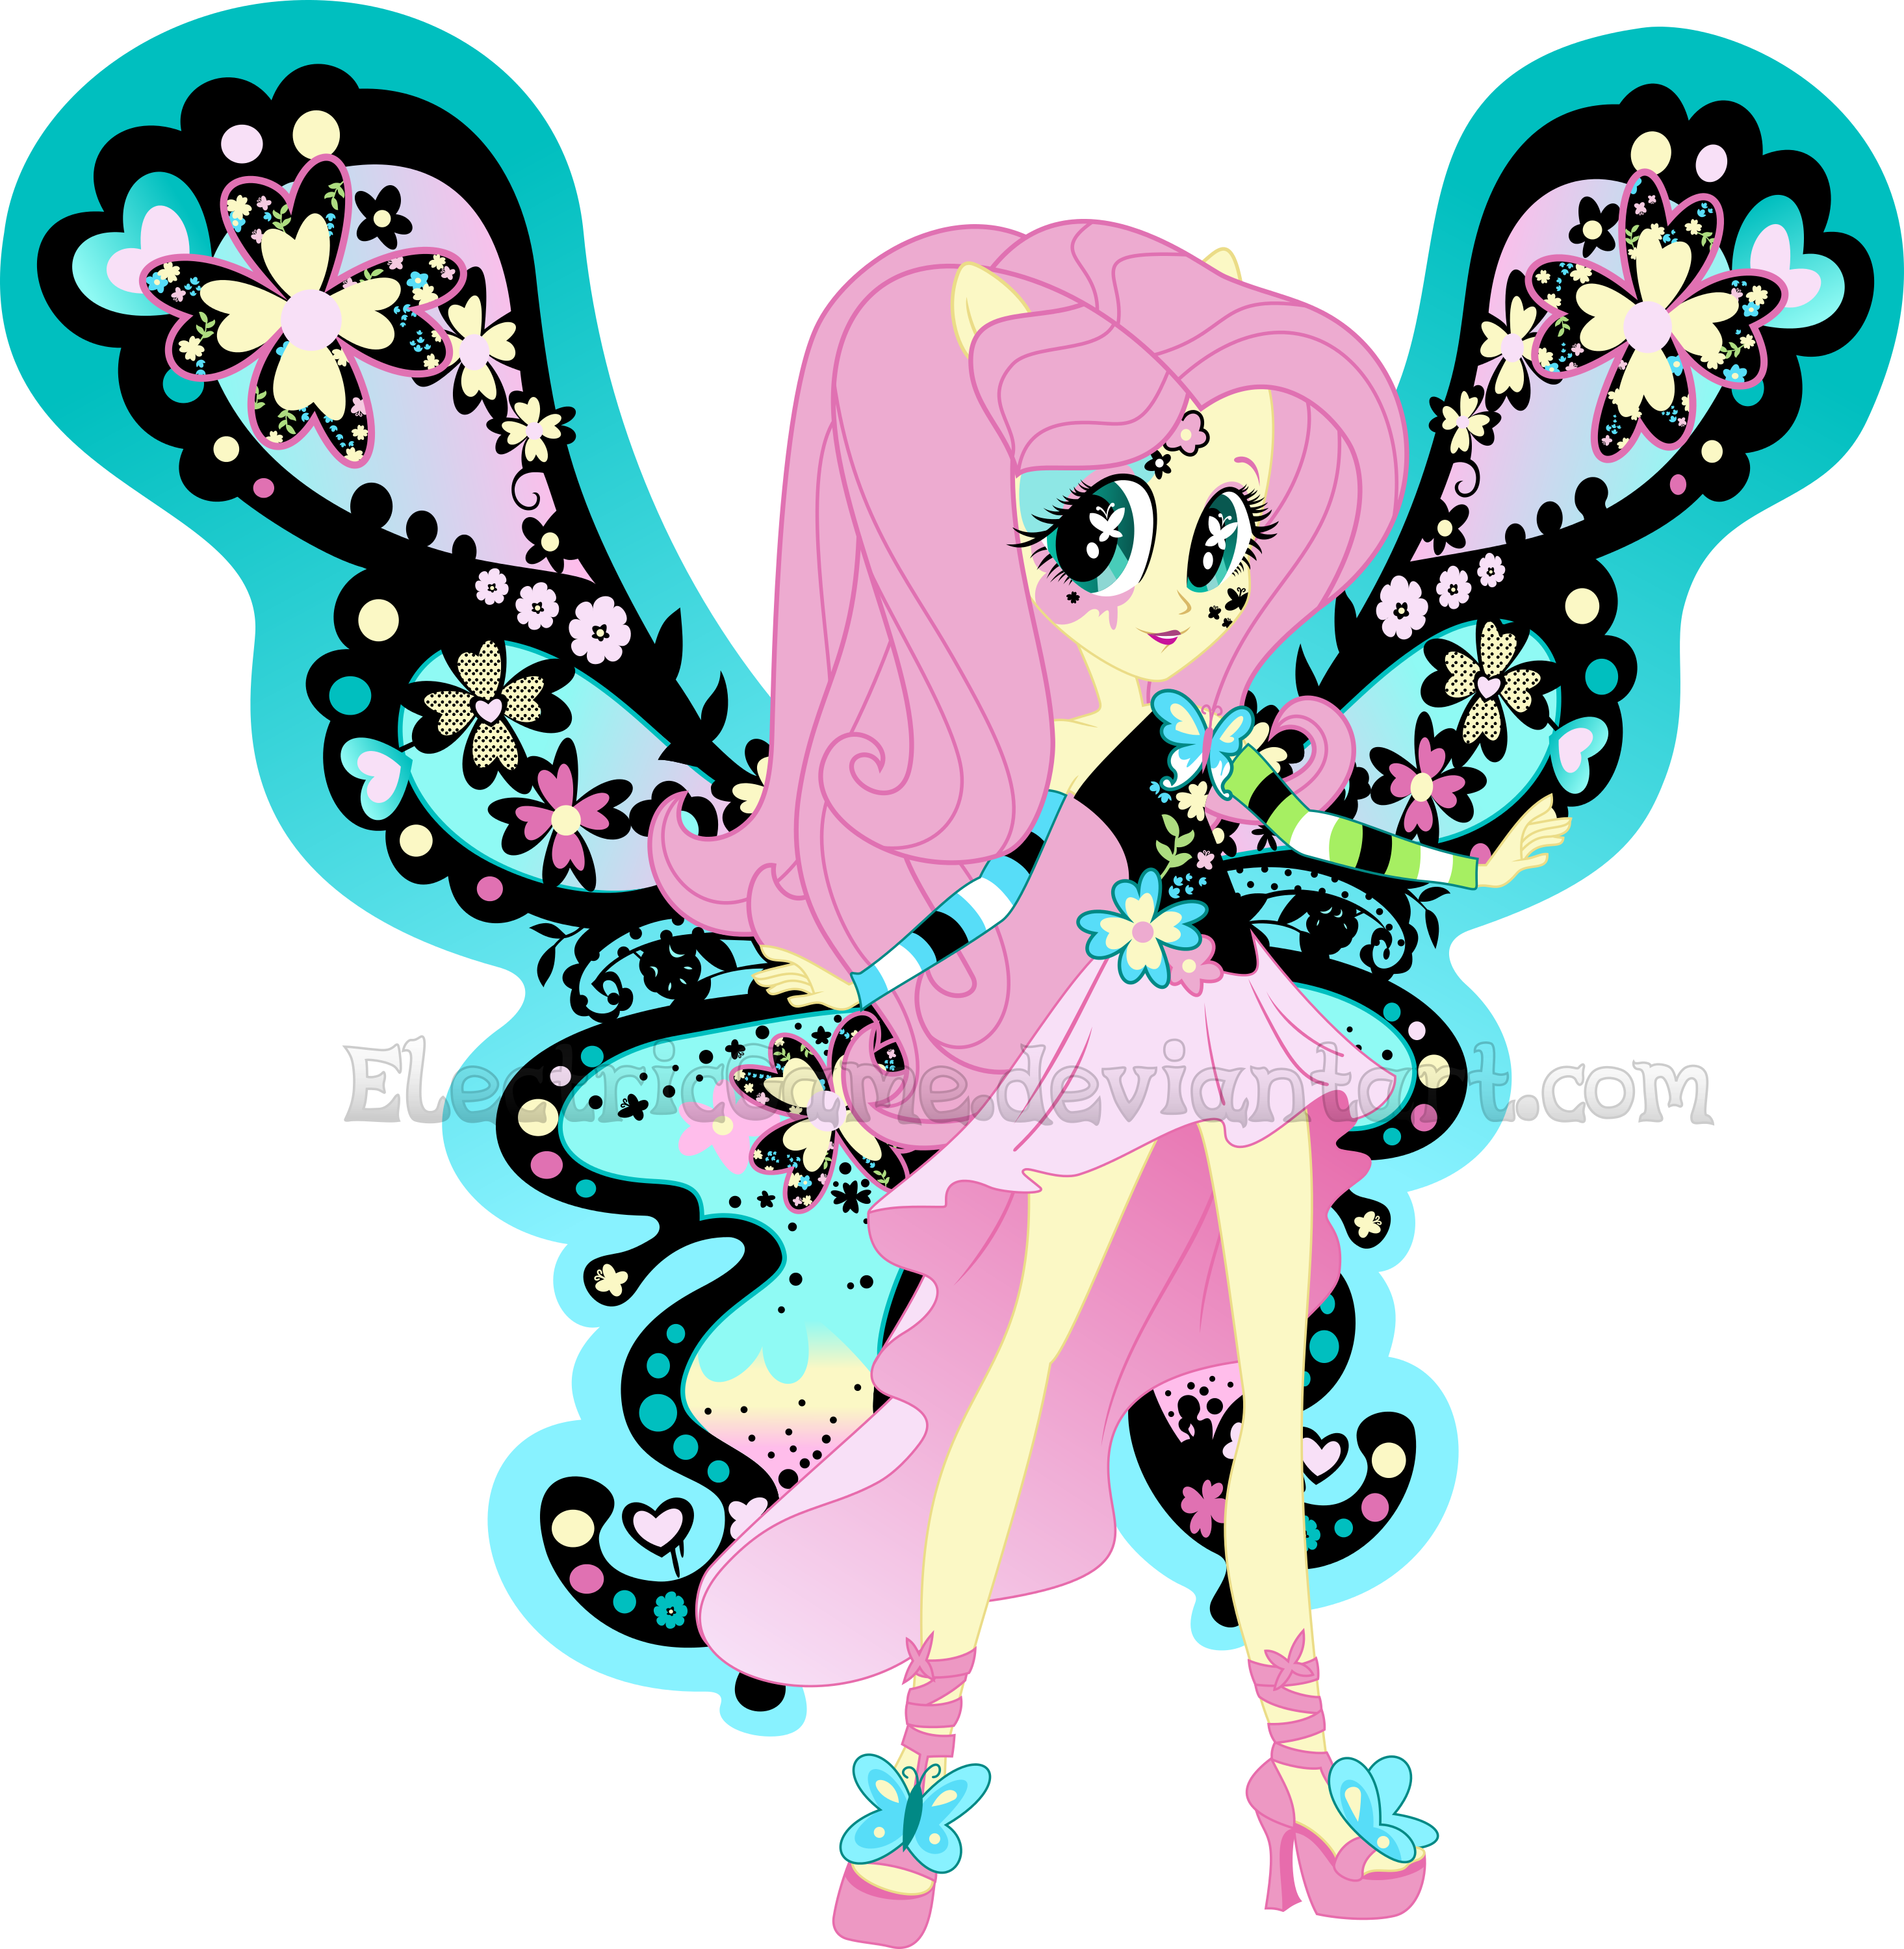 Mlp - Eg - Shy Butterfly - Vector By Electricgame - Equestria Girl Legend Of Everfree Fluttershy (2930x3000)